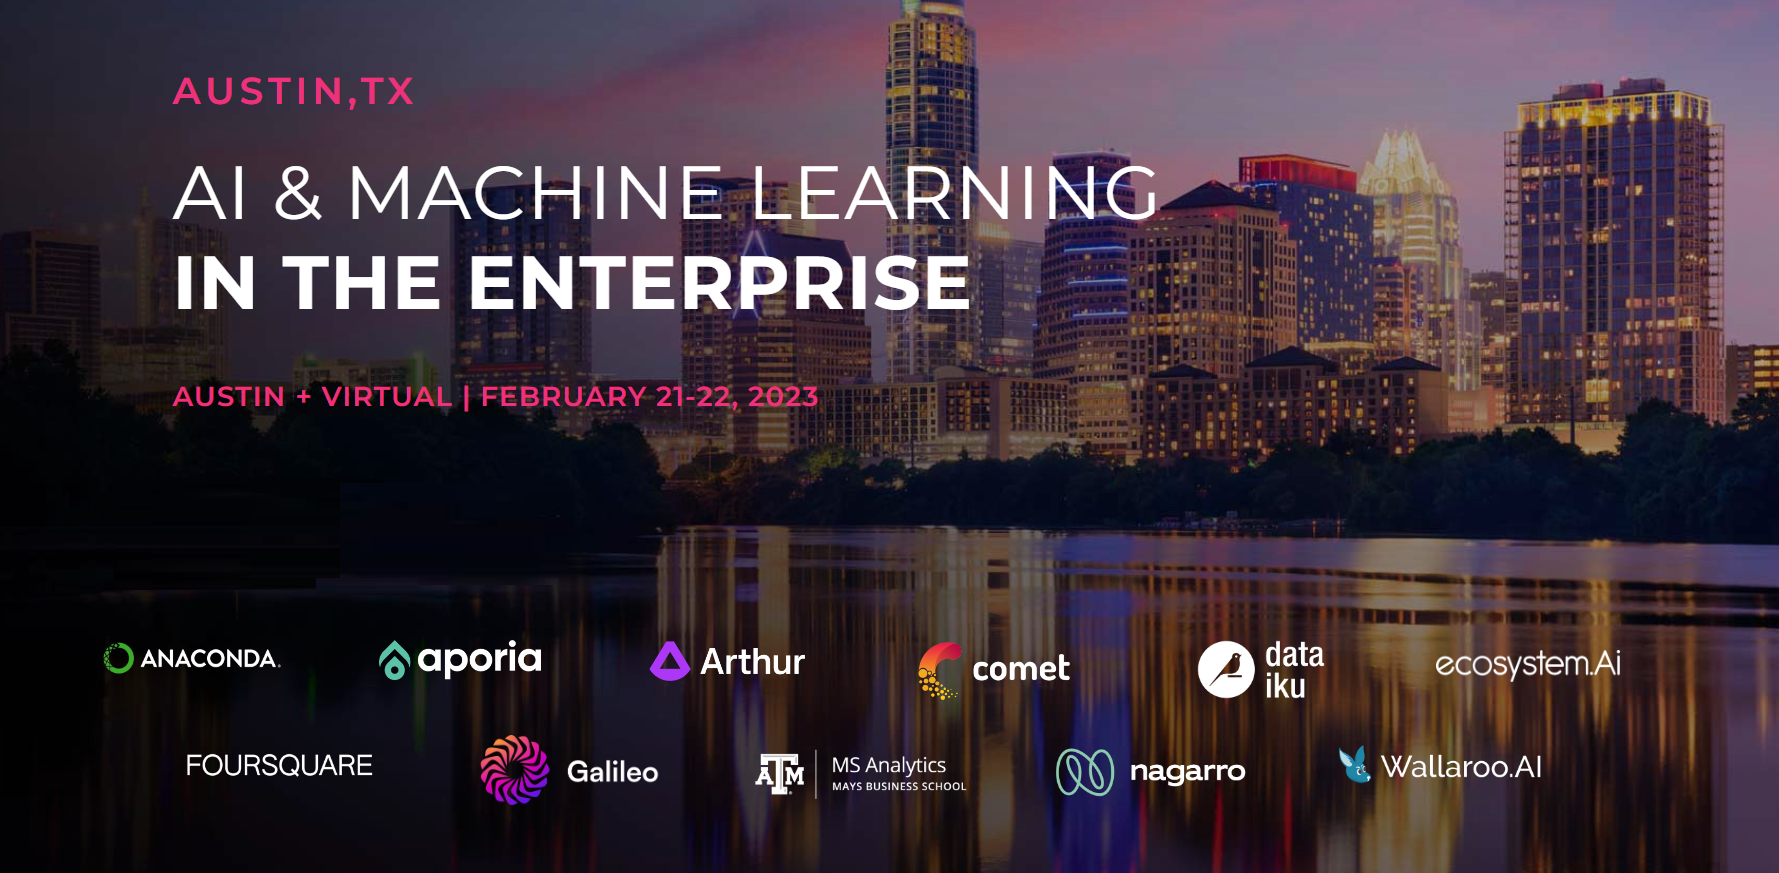 AI & MACHINE LEARNING IN THE ENTERPRISE